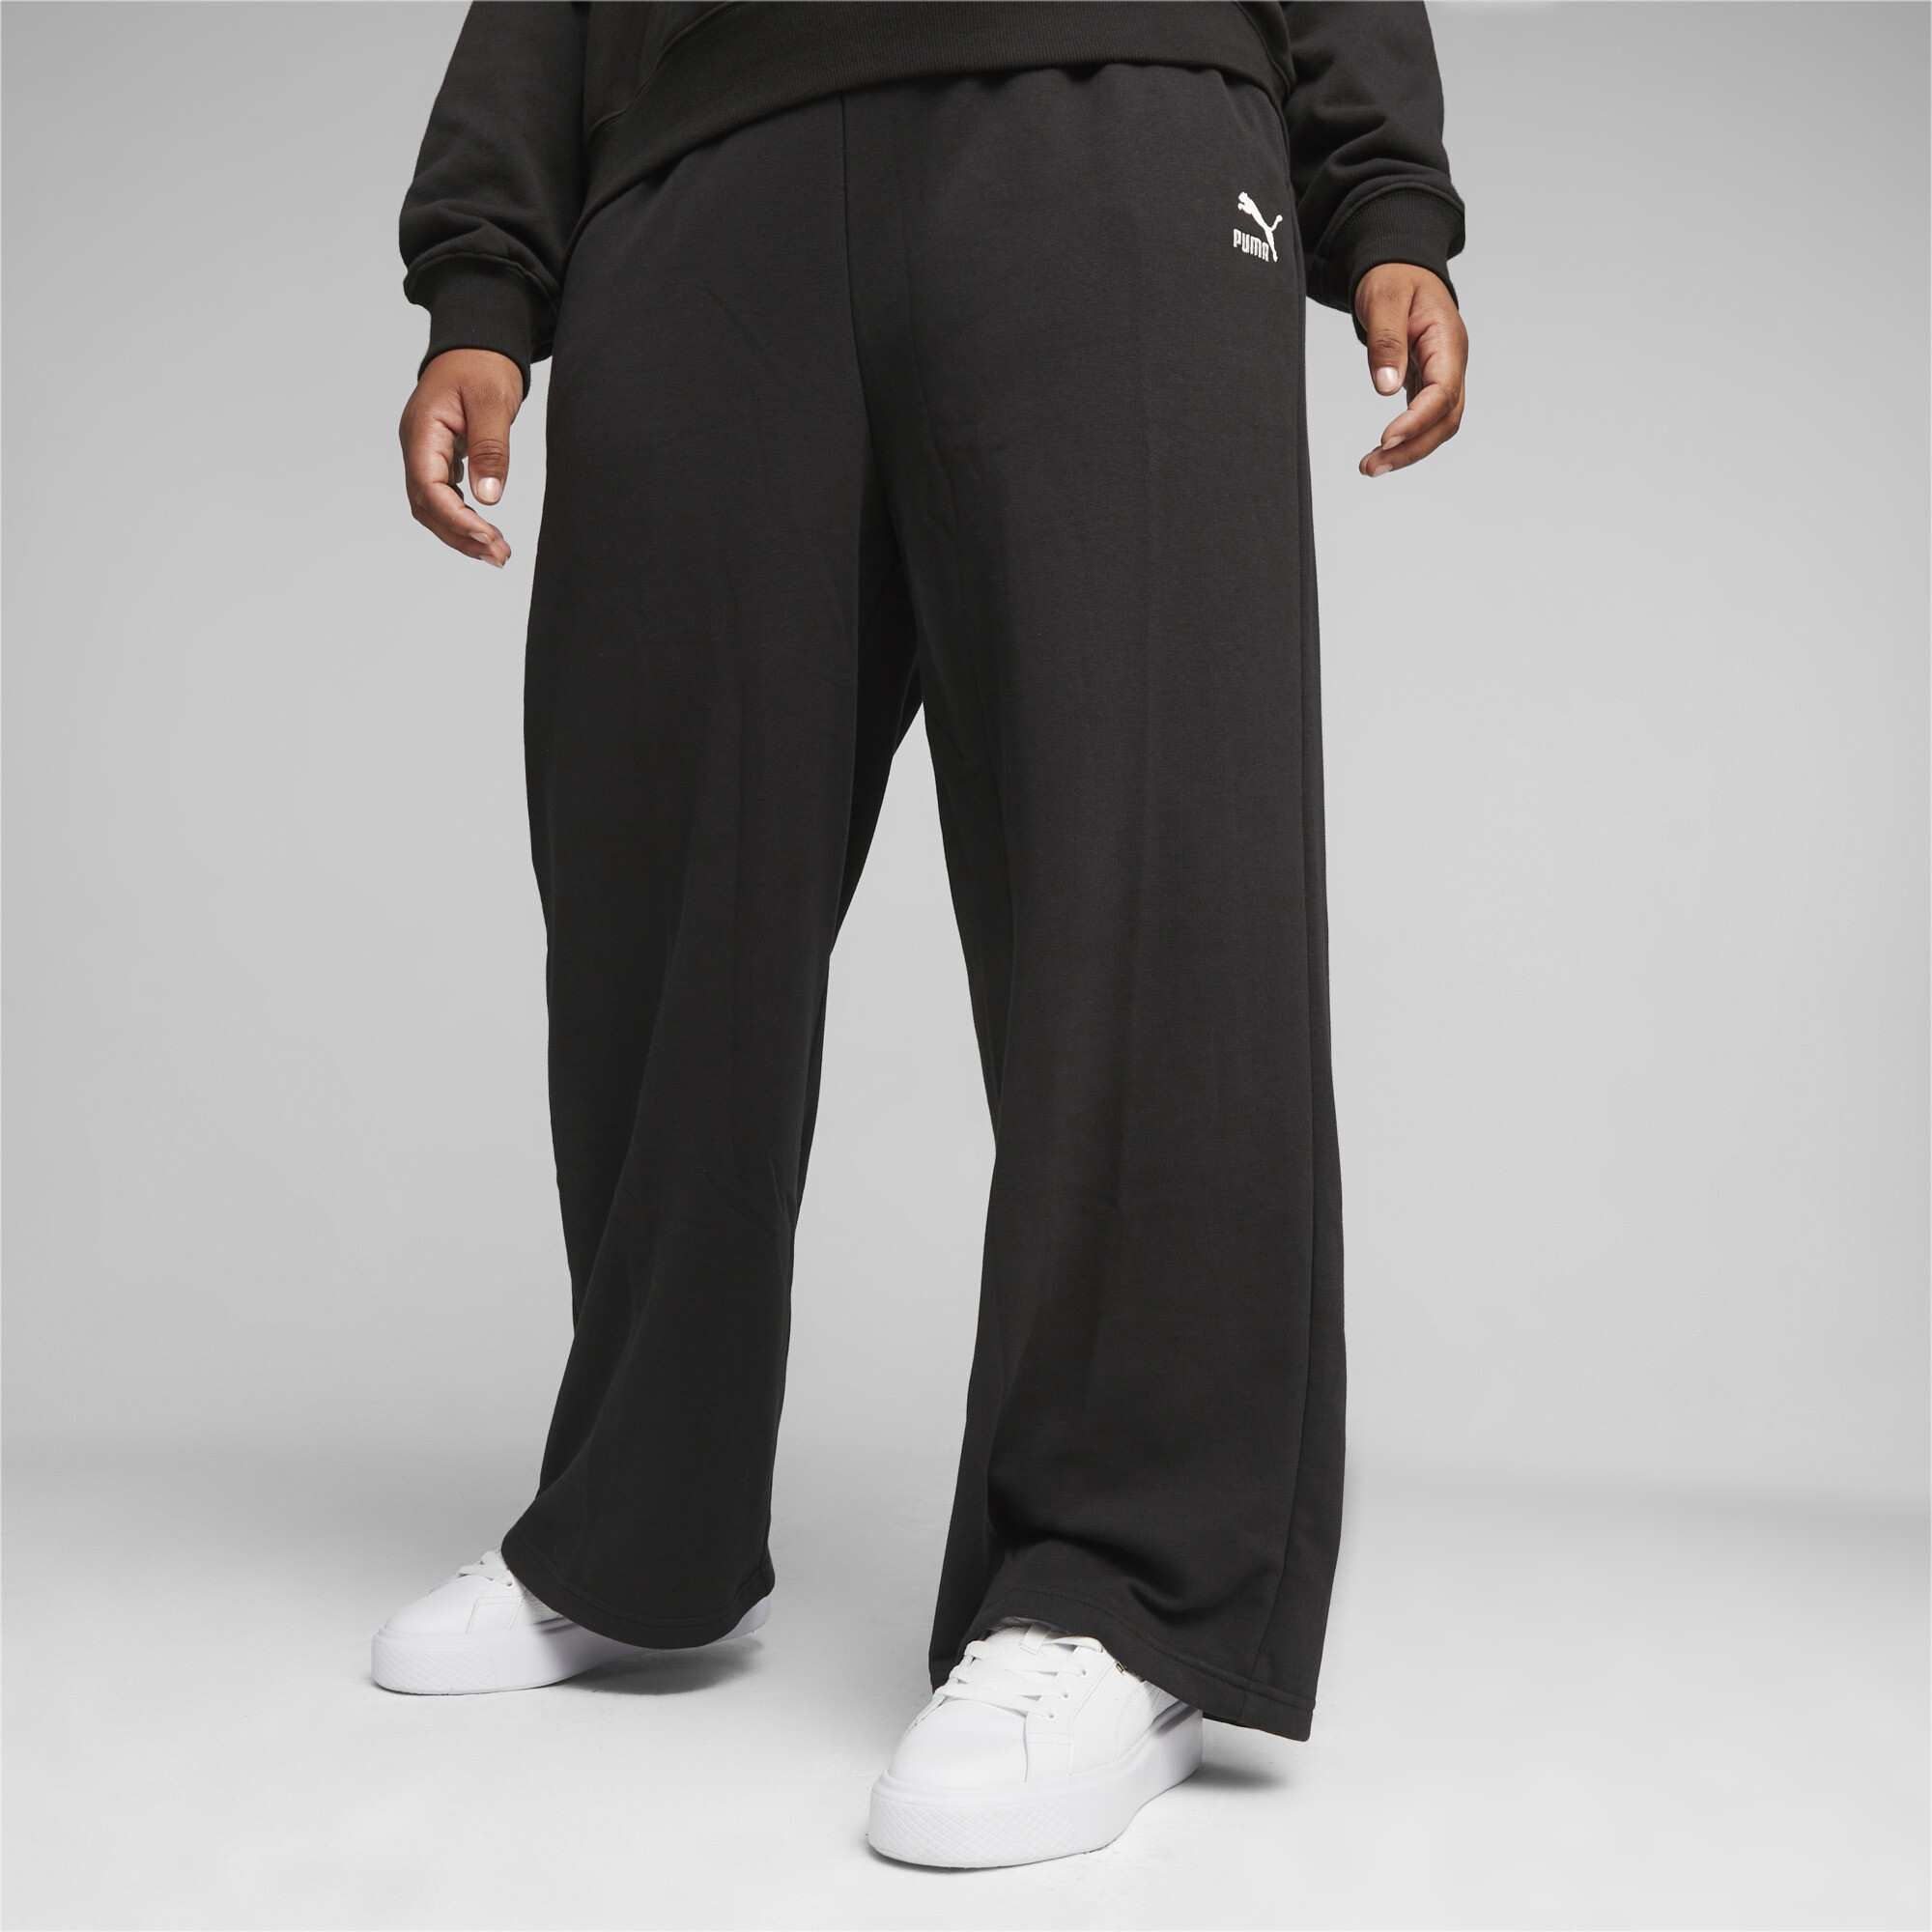 Women's PUMA CLASSICS Relaxed Sweatpants In Black, Size Small